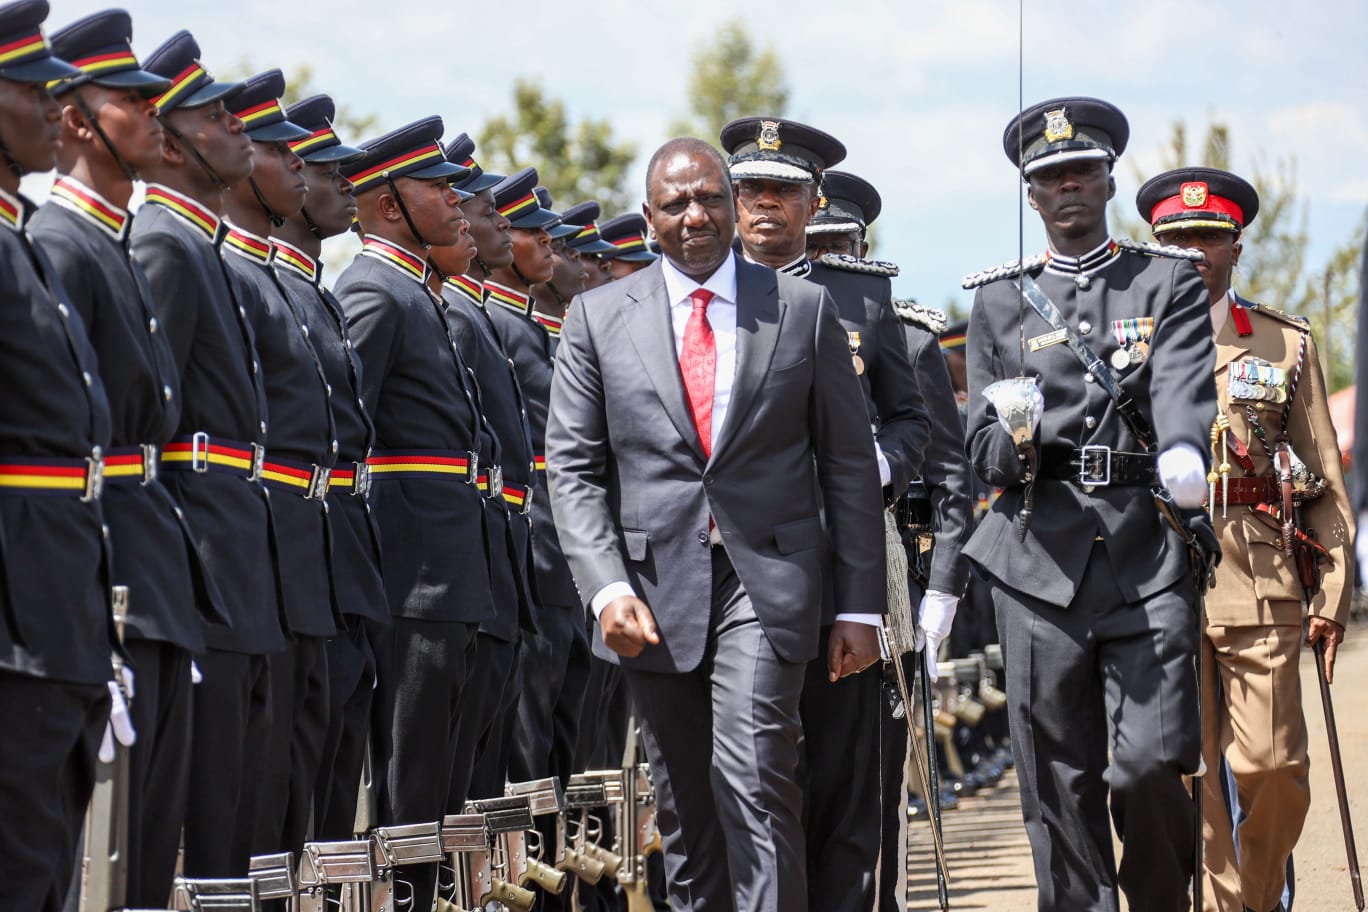 High Court Stops Kenya from Deploying police to Haiti